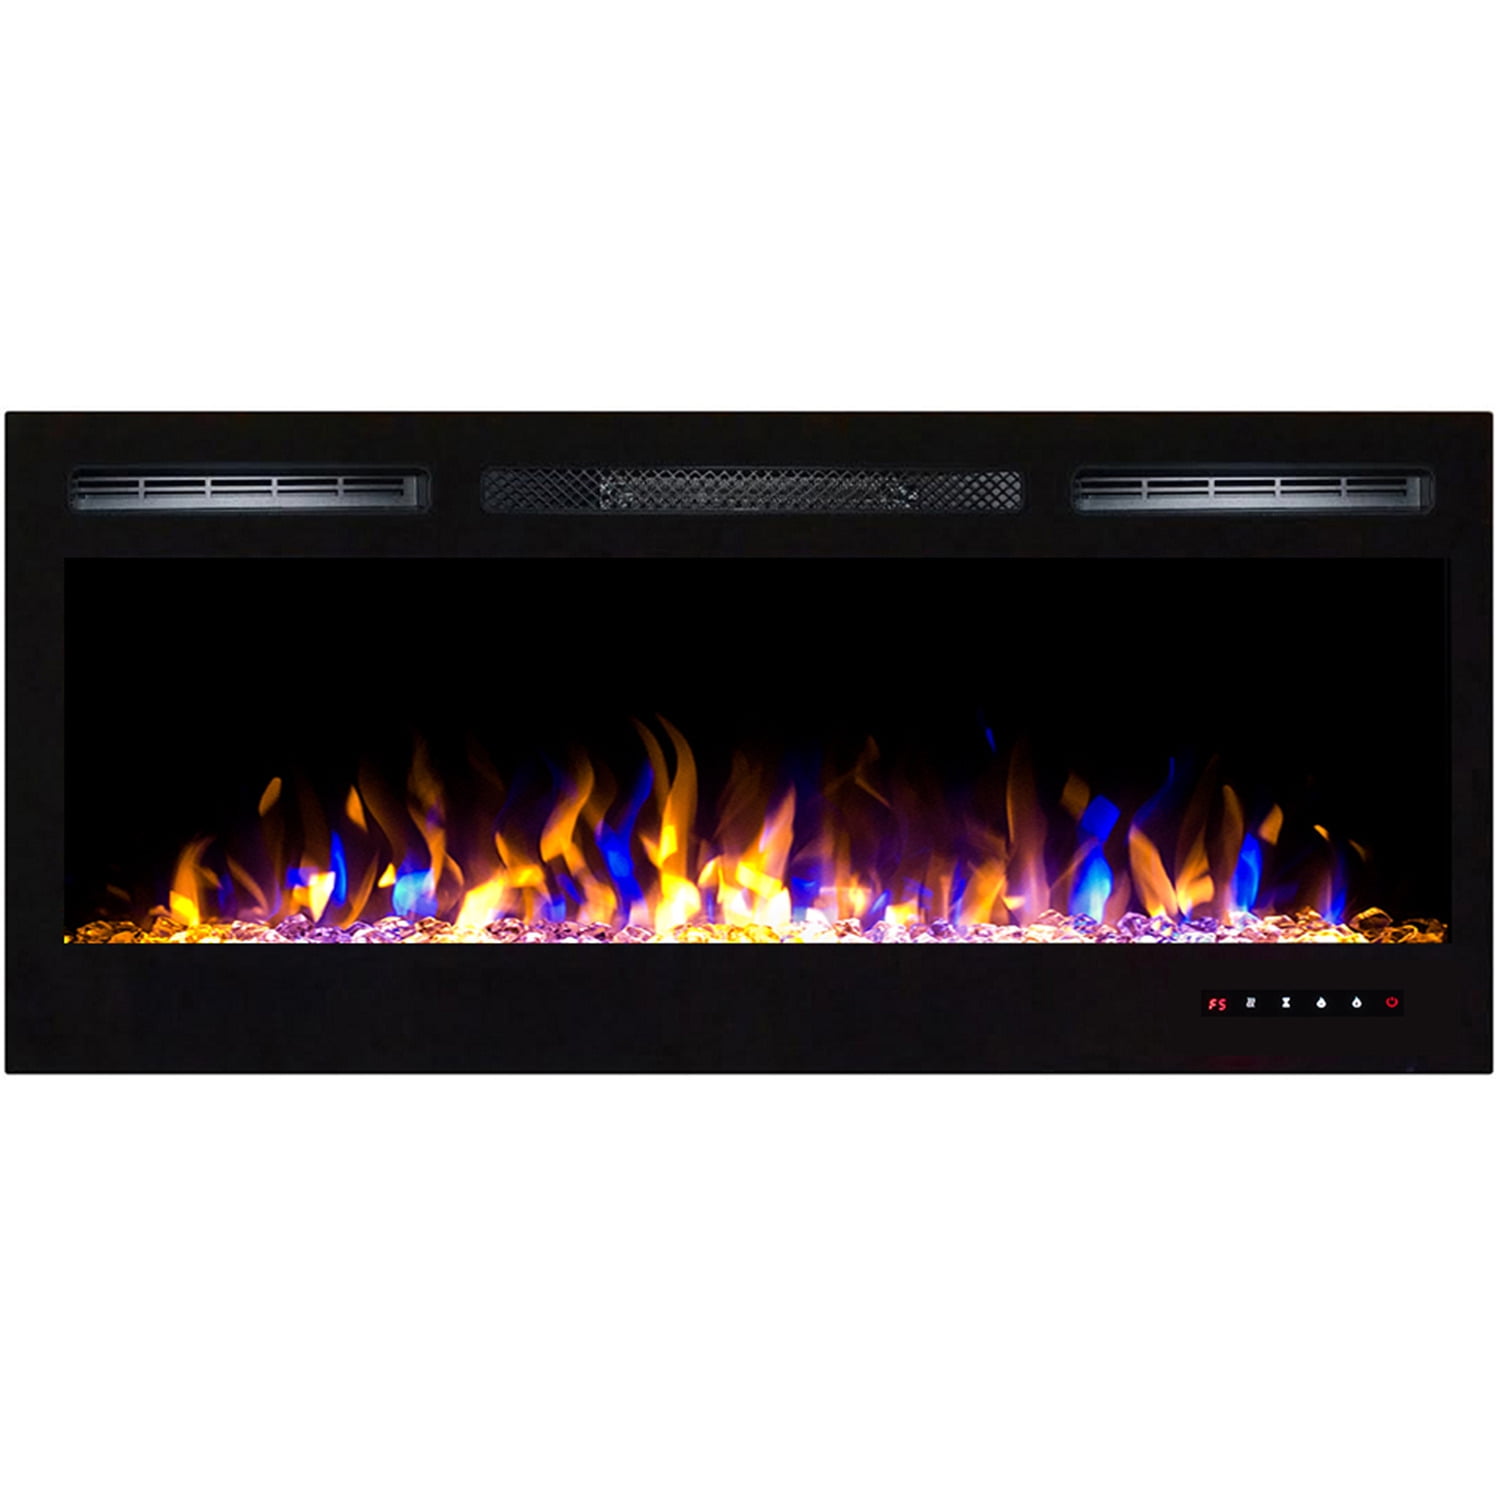 Regal Flame Lexington 35" Multi-Color Built-in Ventless Recessed Wall Mounted Electric Fireplace Better than Wood Fireplaces, Ga